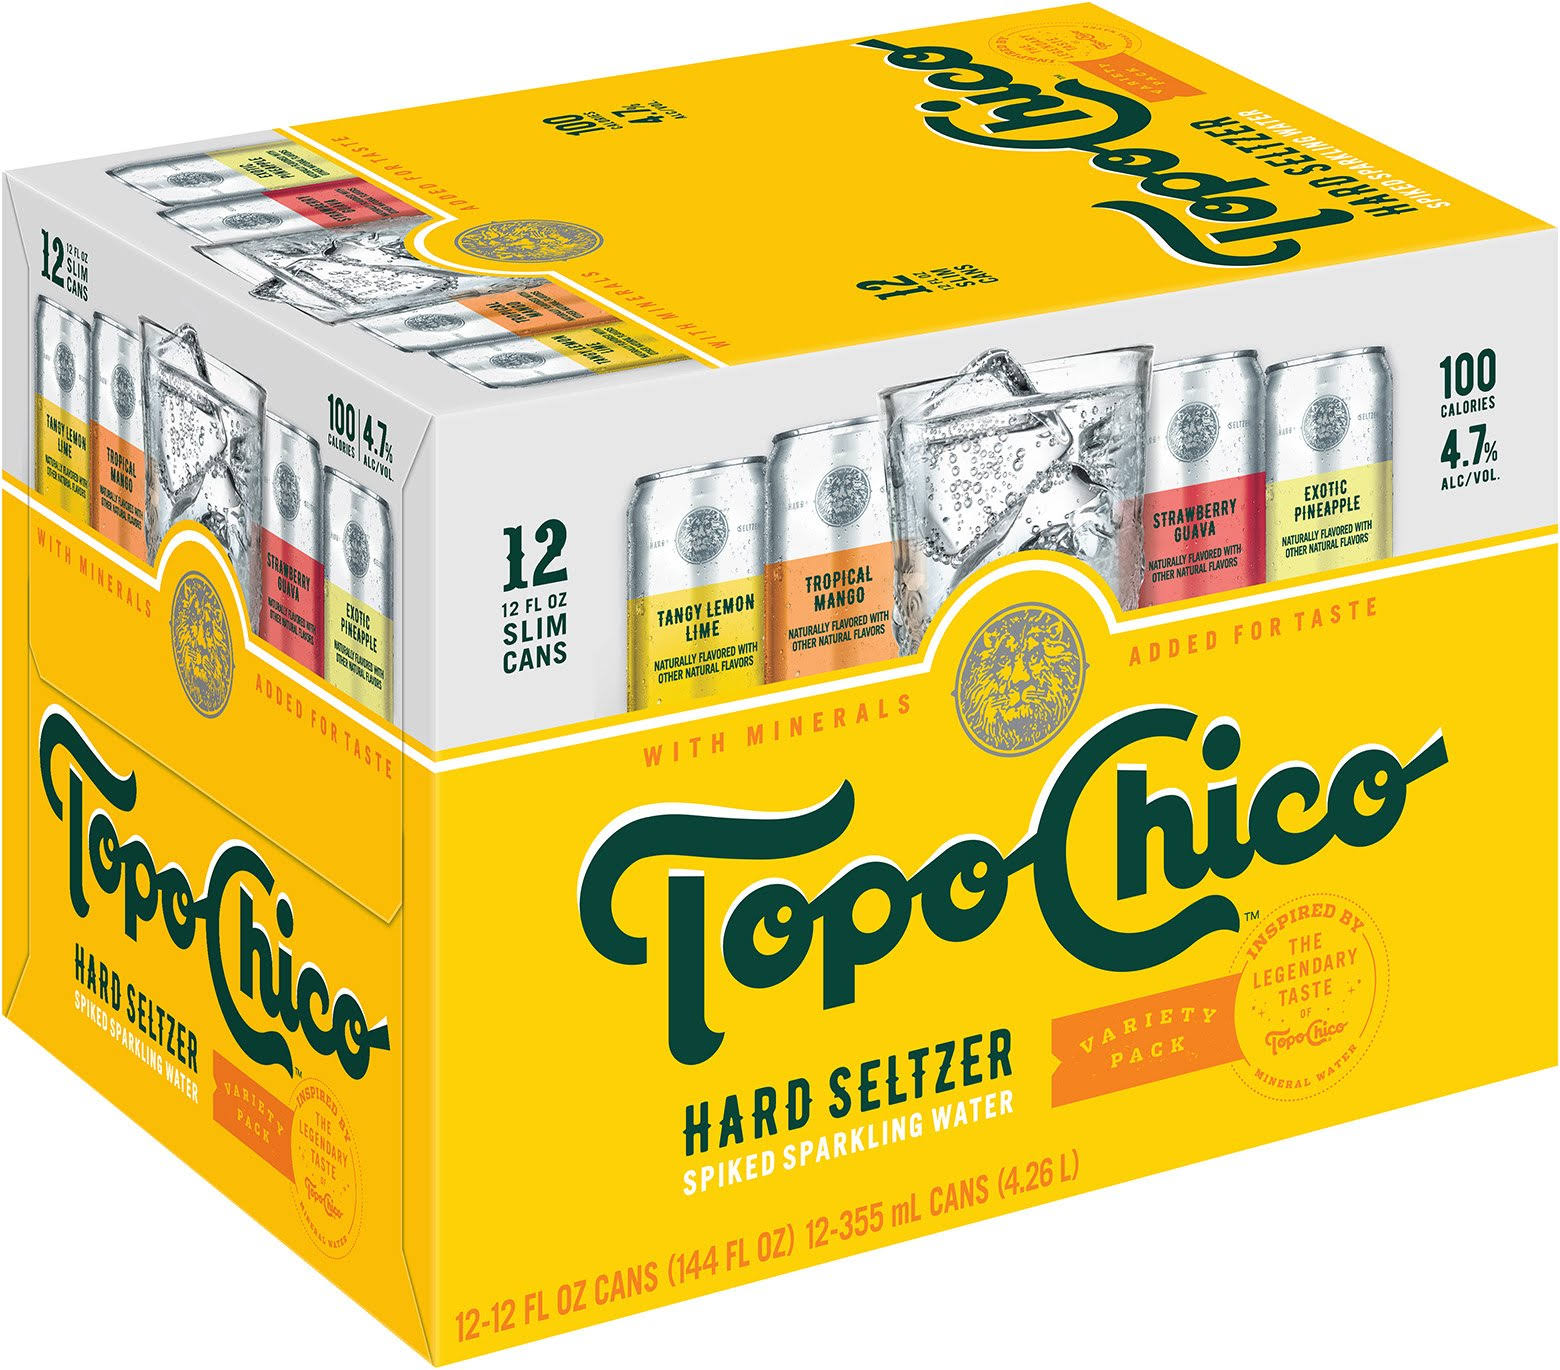 Topo Chico Hard Seltzer, Variety Pack - 12 pack, 12 fl oz cans